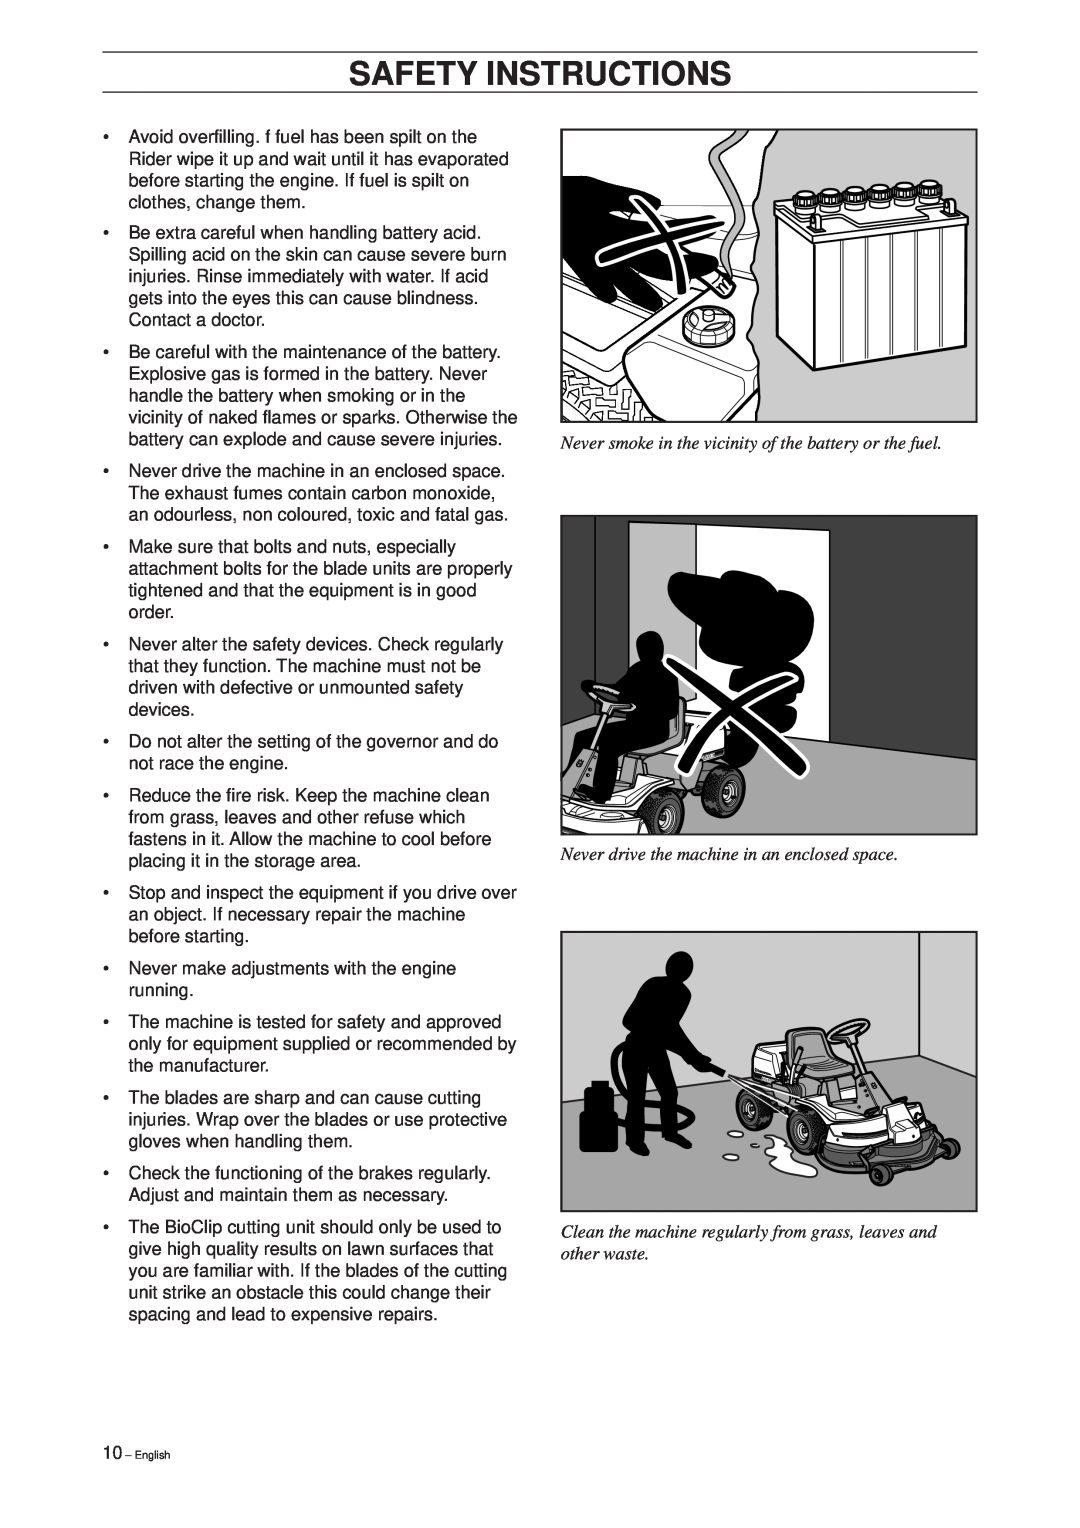 Husqvarna Rider 16 manual battery can explode and cause severe injuries, Safety Instructions 